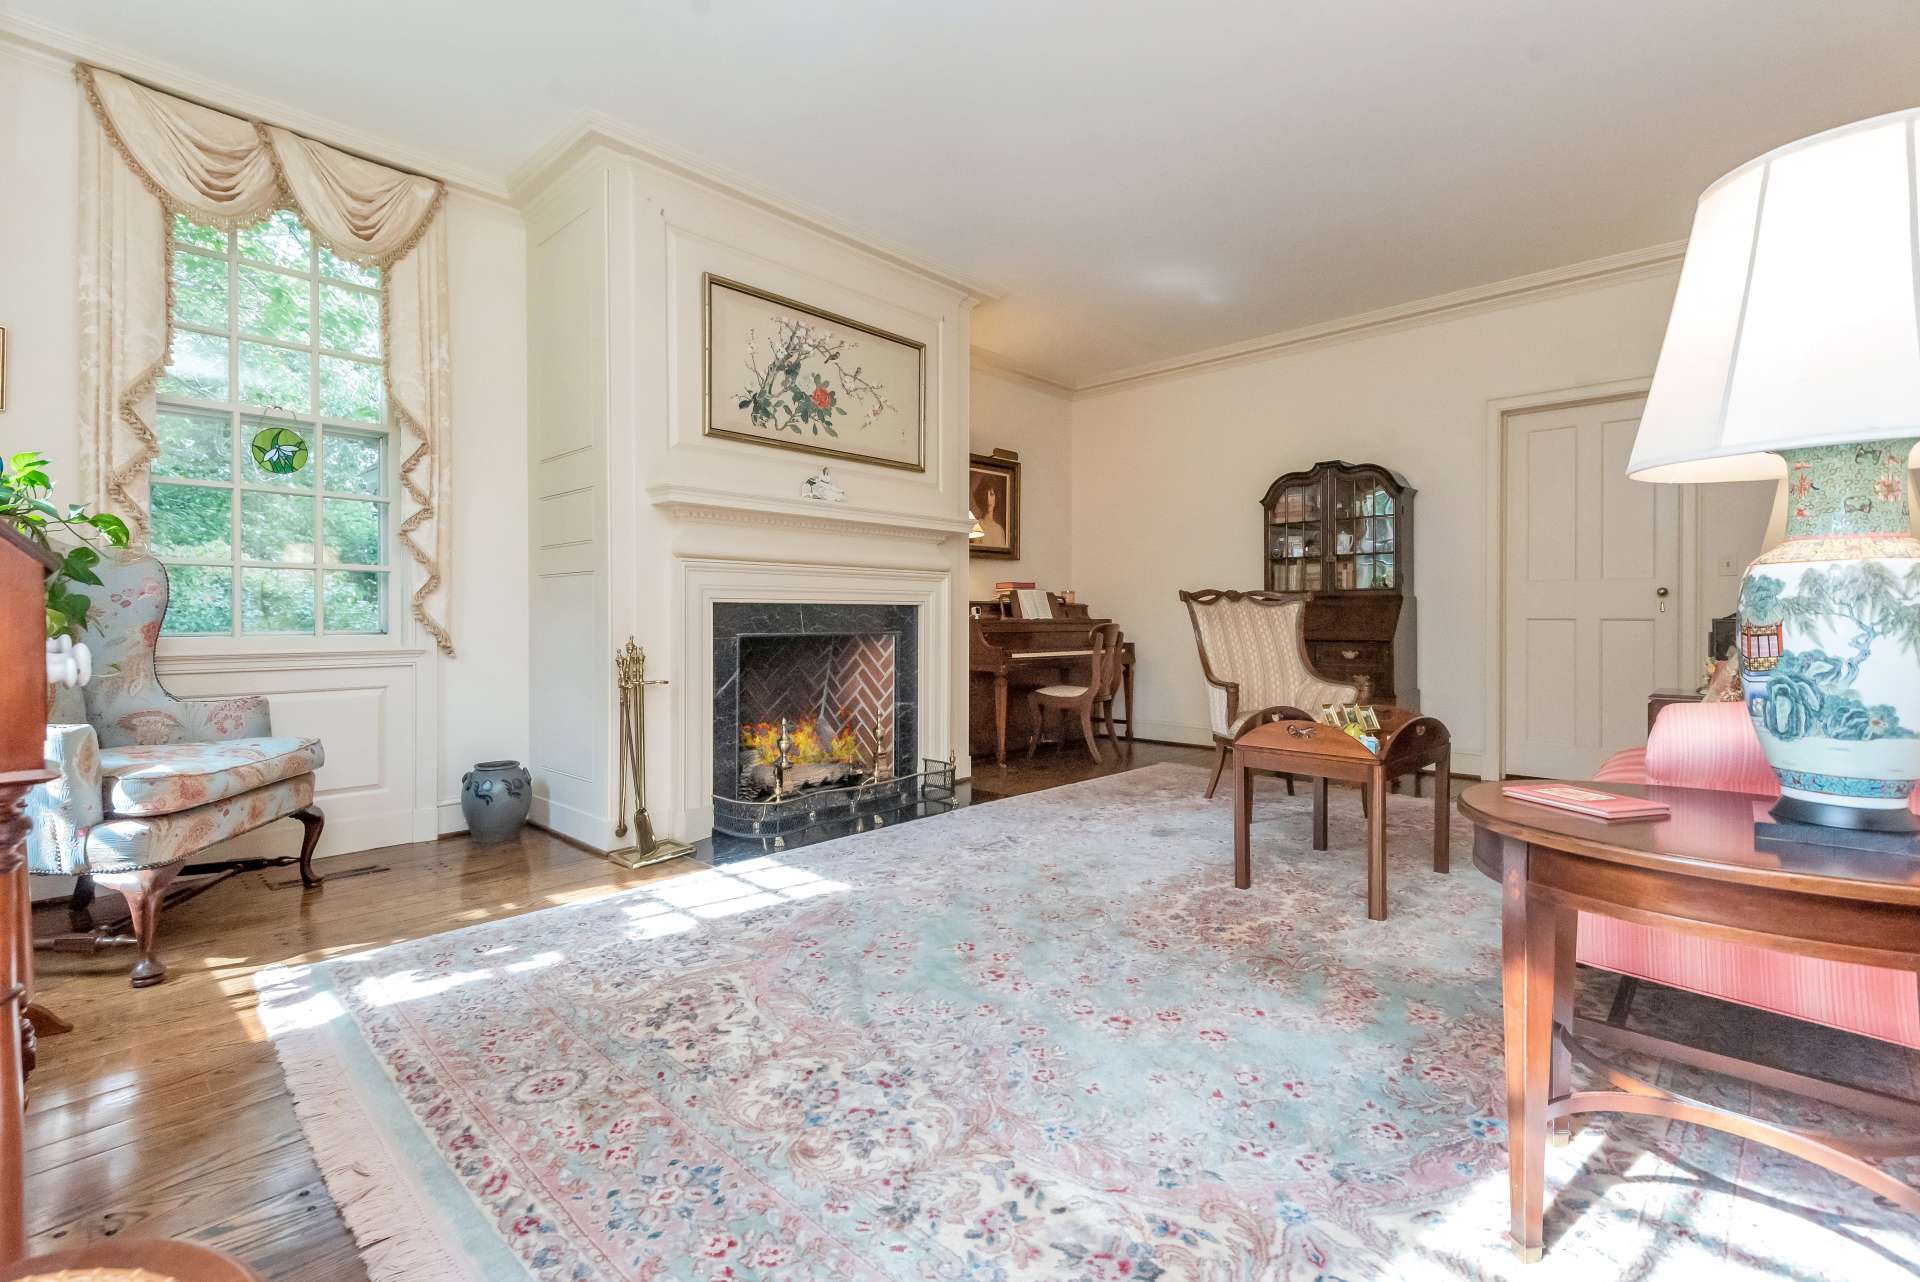 Step inside and be mesmerized by the large windows filling each room with natural light. This is the parlor with first of 3 fireplaces, each transitioned to gas logs.